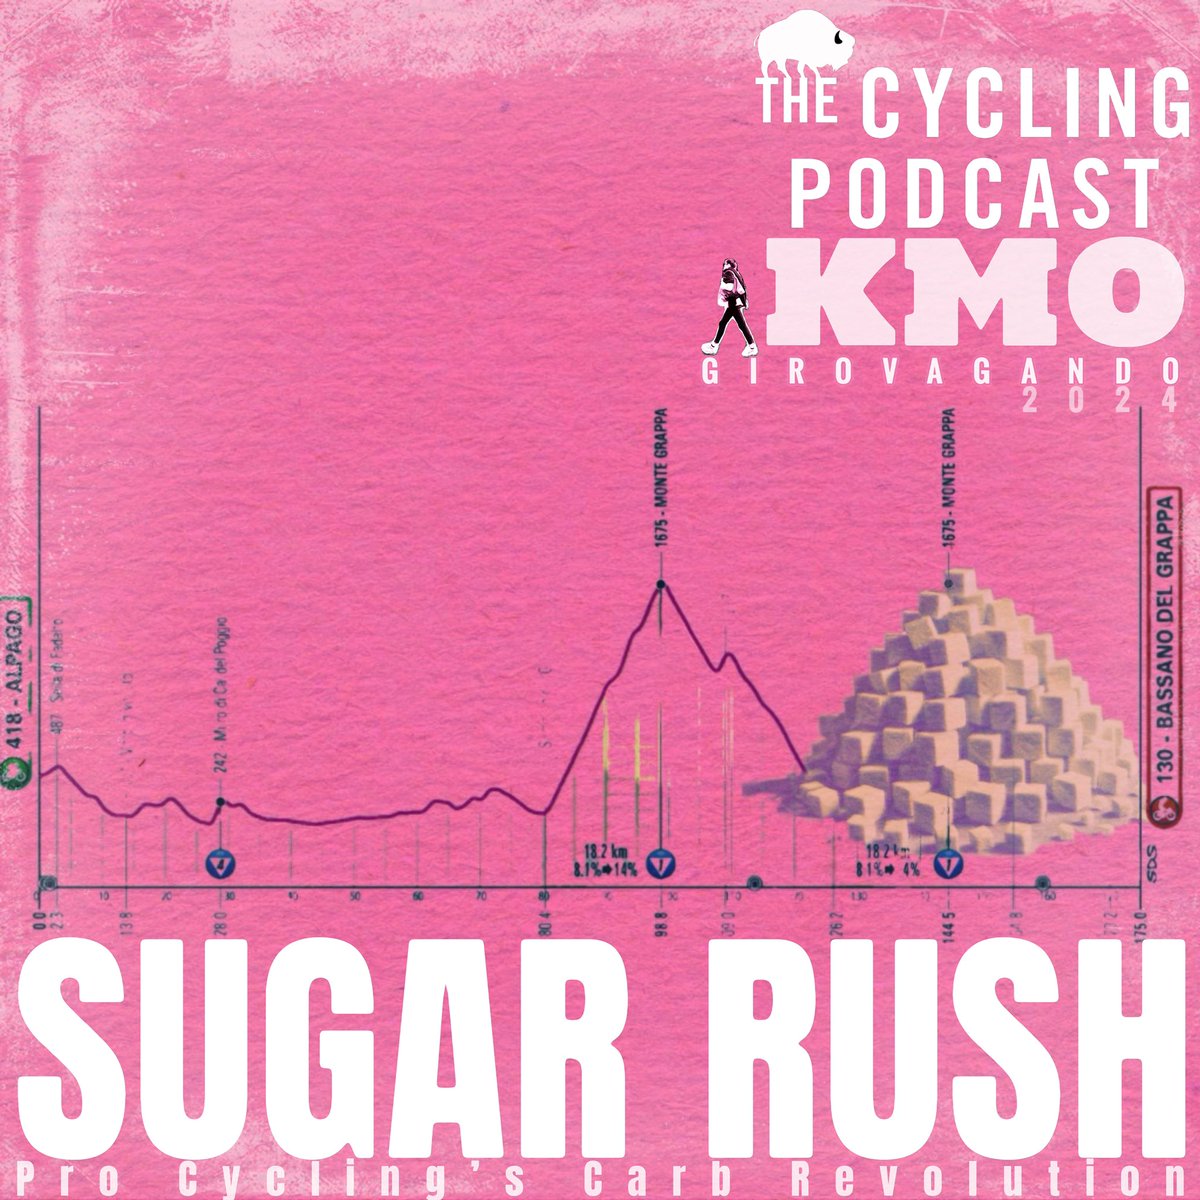 Sugar Rush, on the ‘carb revolution’ in endurance sports, is online for Friends of the @cycling_podcast now. Excellent contribution to this by @FranReyesF